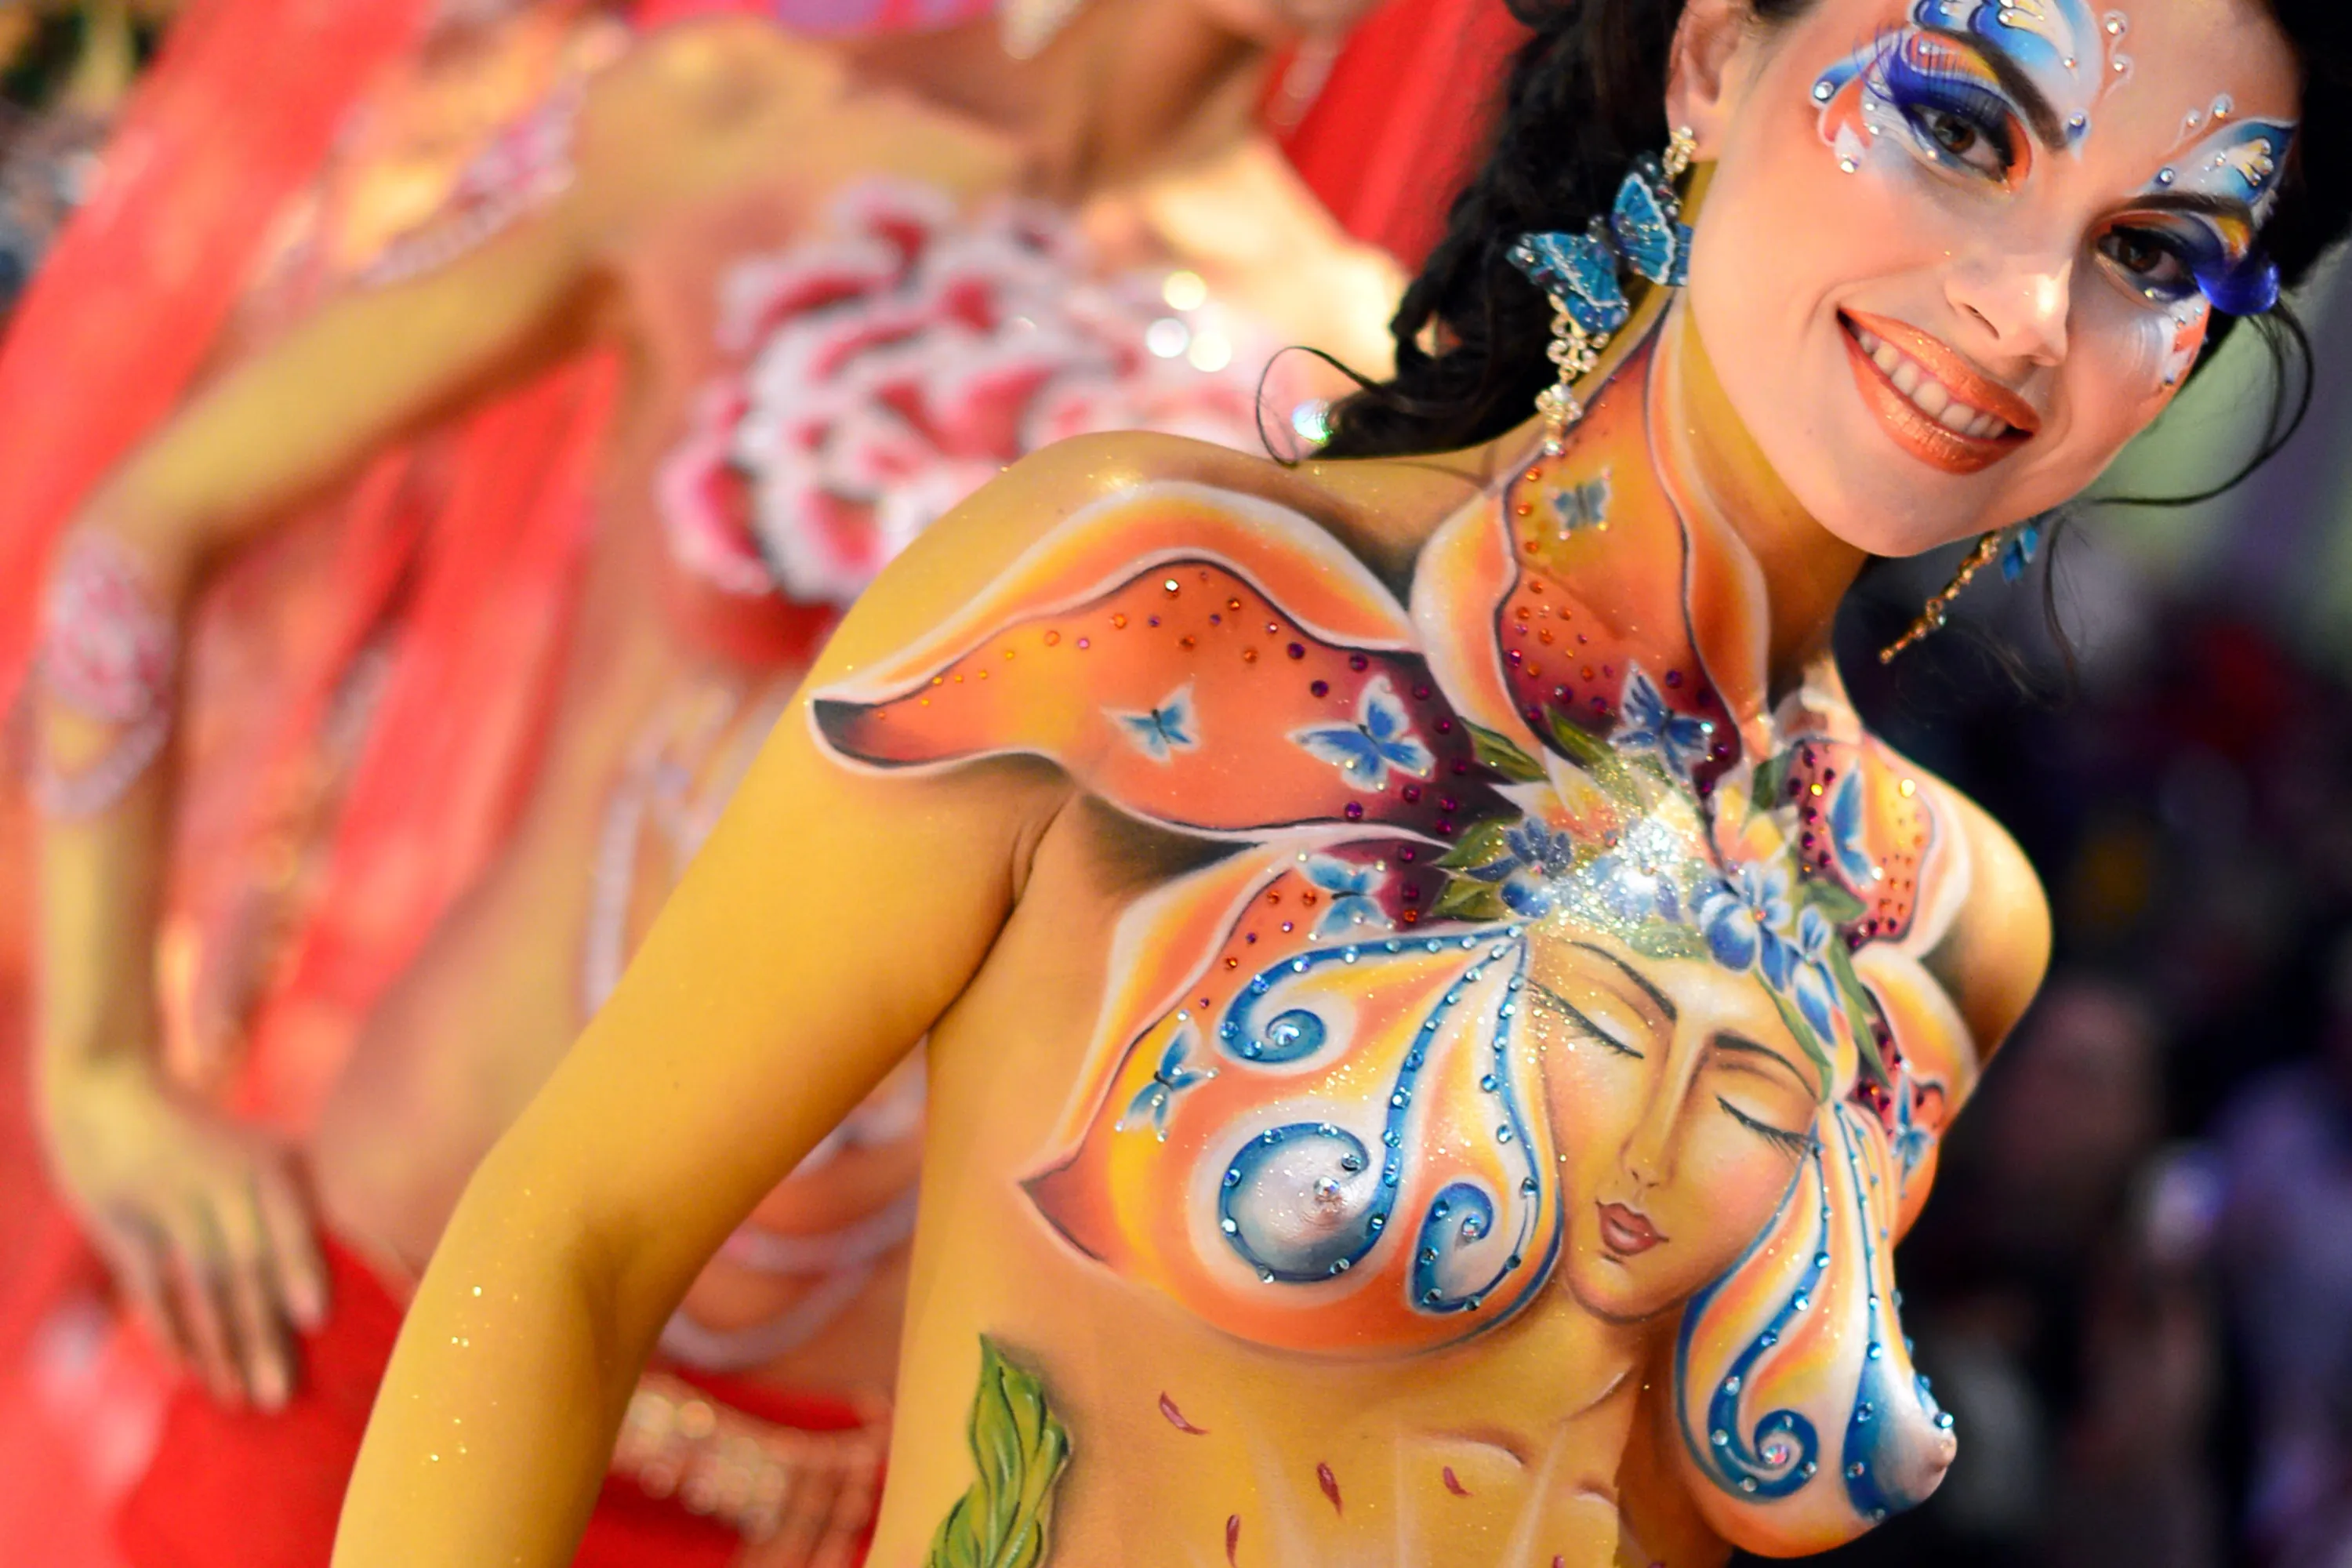 Body Painting" Contest of the OMC Hairworld World Cup 2014 i